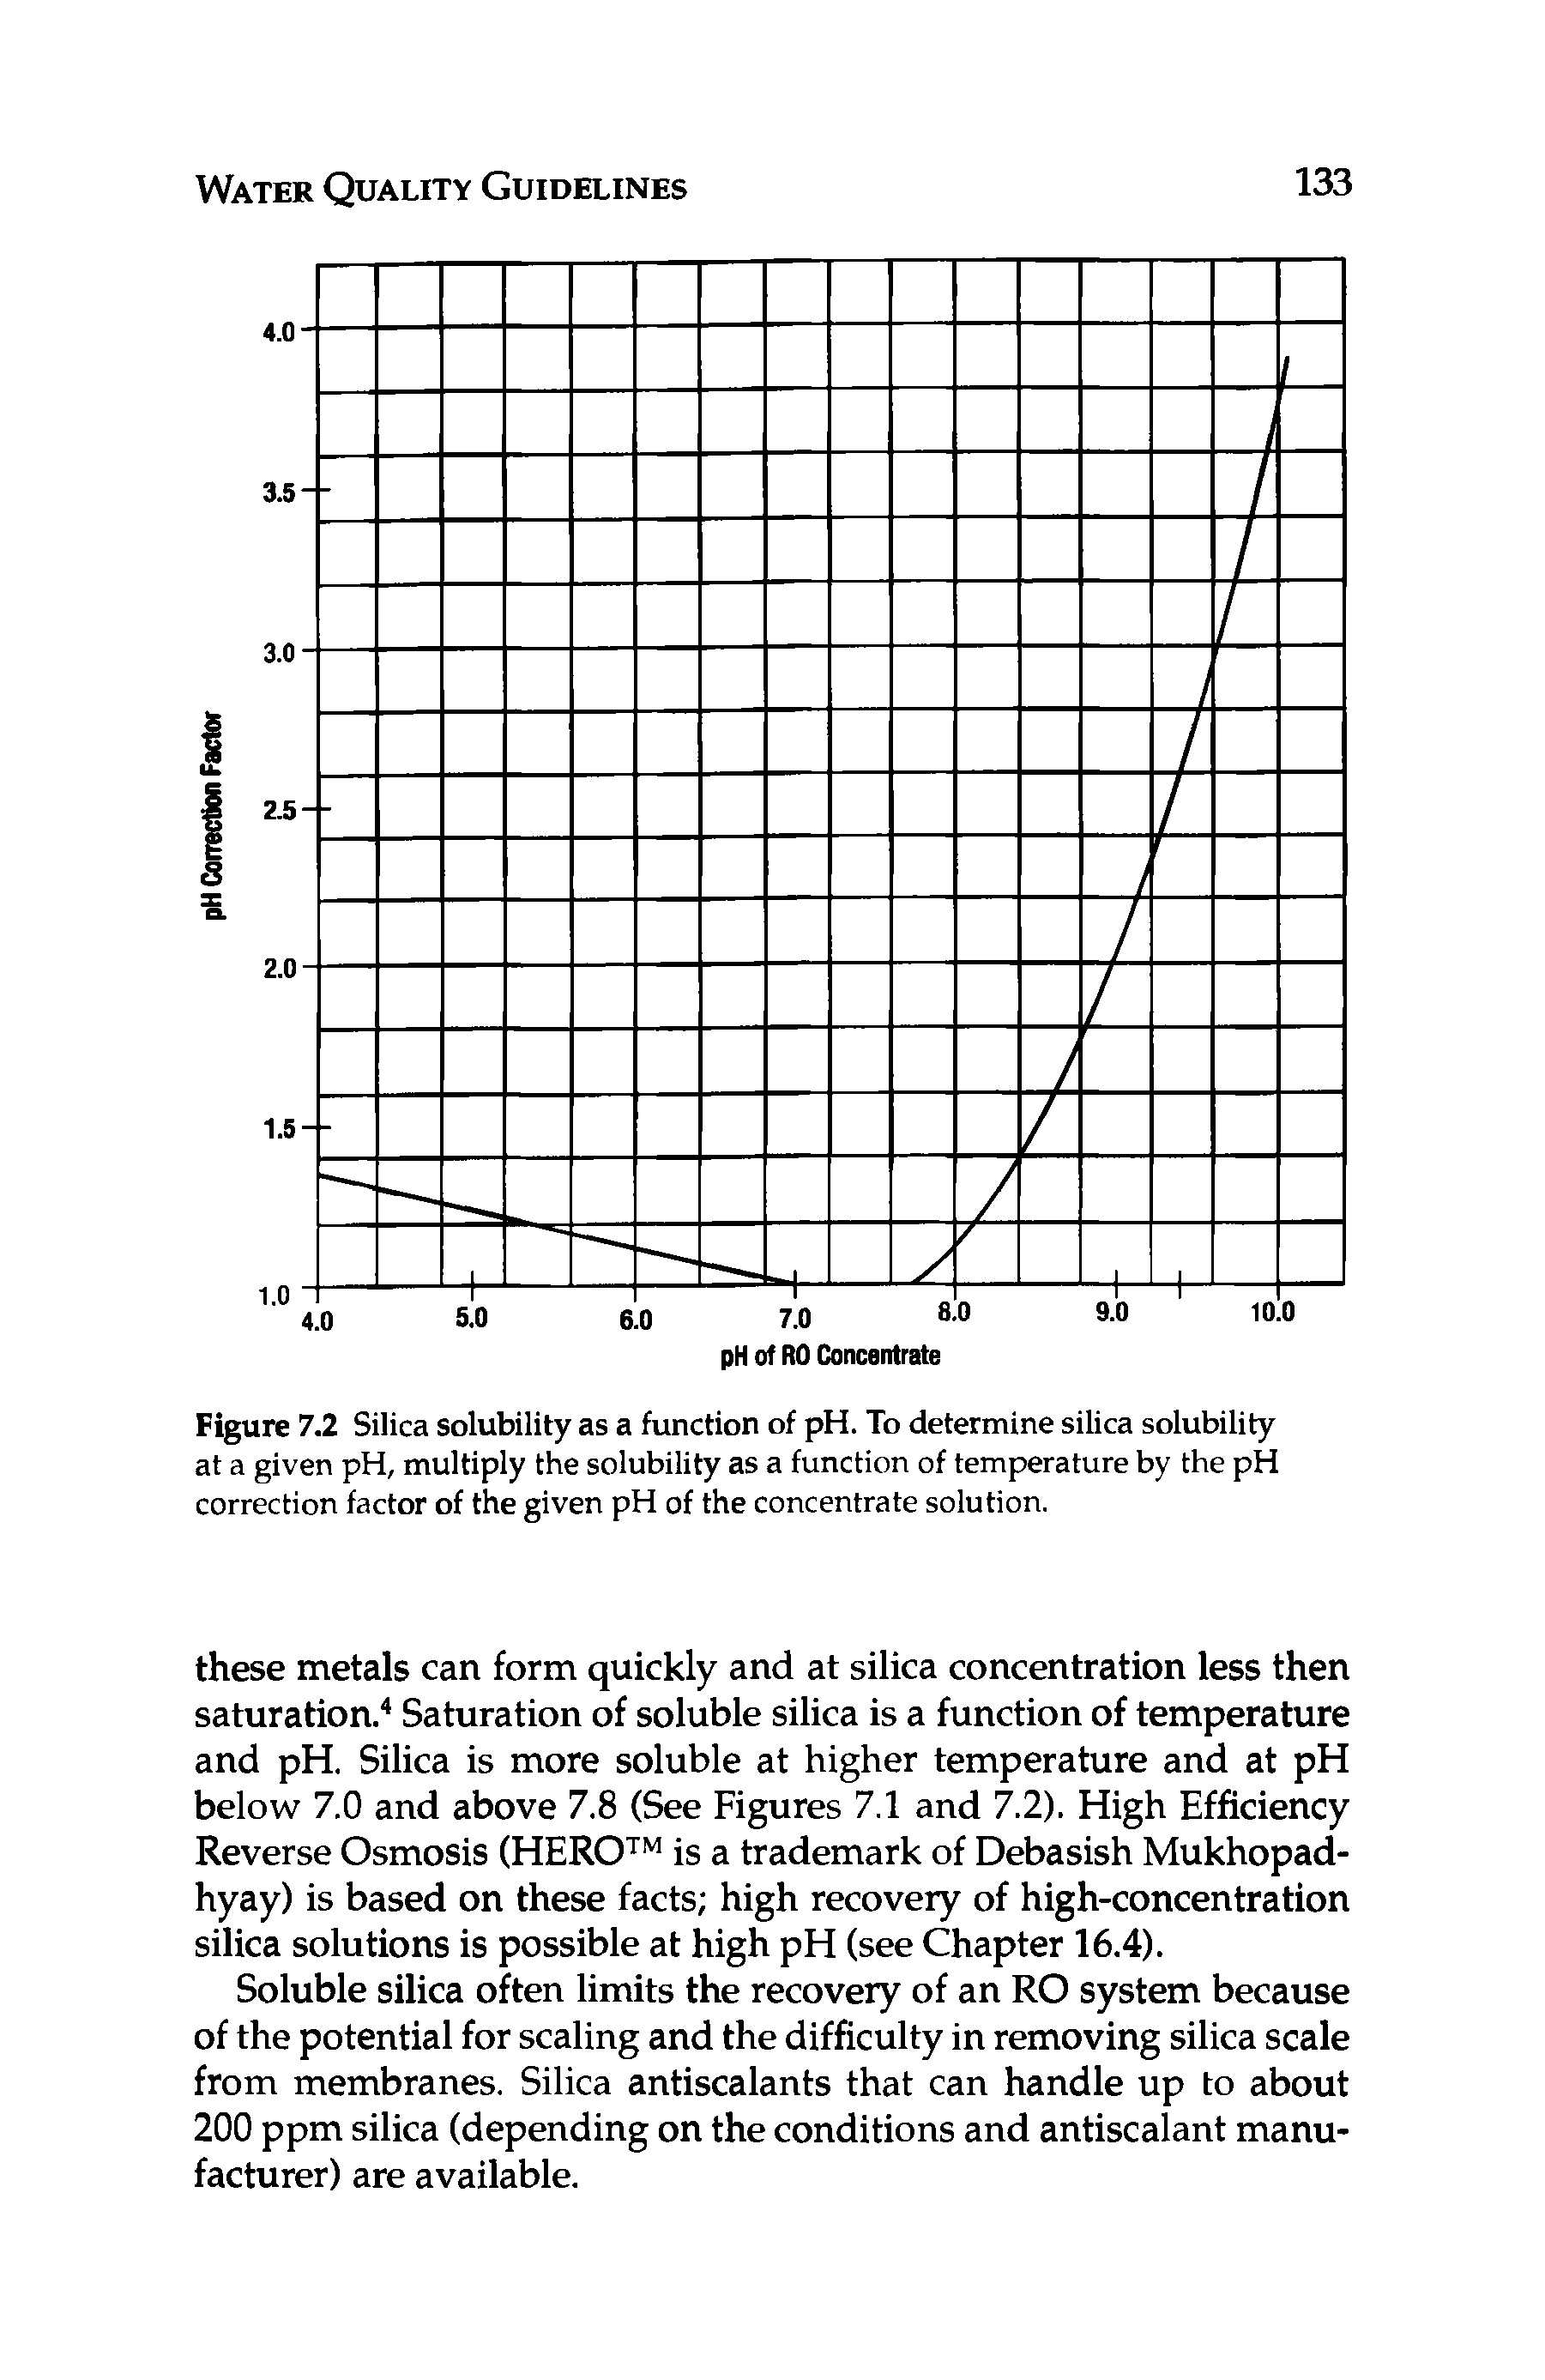 Figure 7.2 Silica solubility as a function of pH. To determine silica solubility at a given pH, multiply the solubility as a function of temperature by the pH correction factor of the given pH of the concentrate solution.